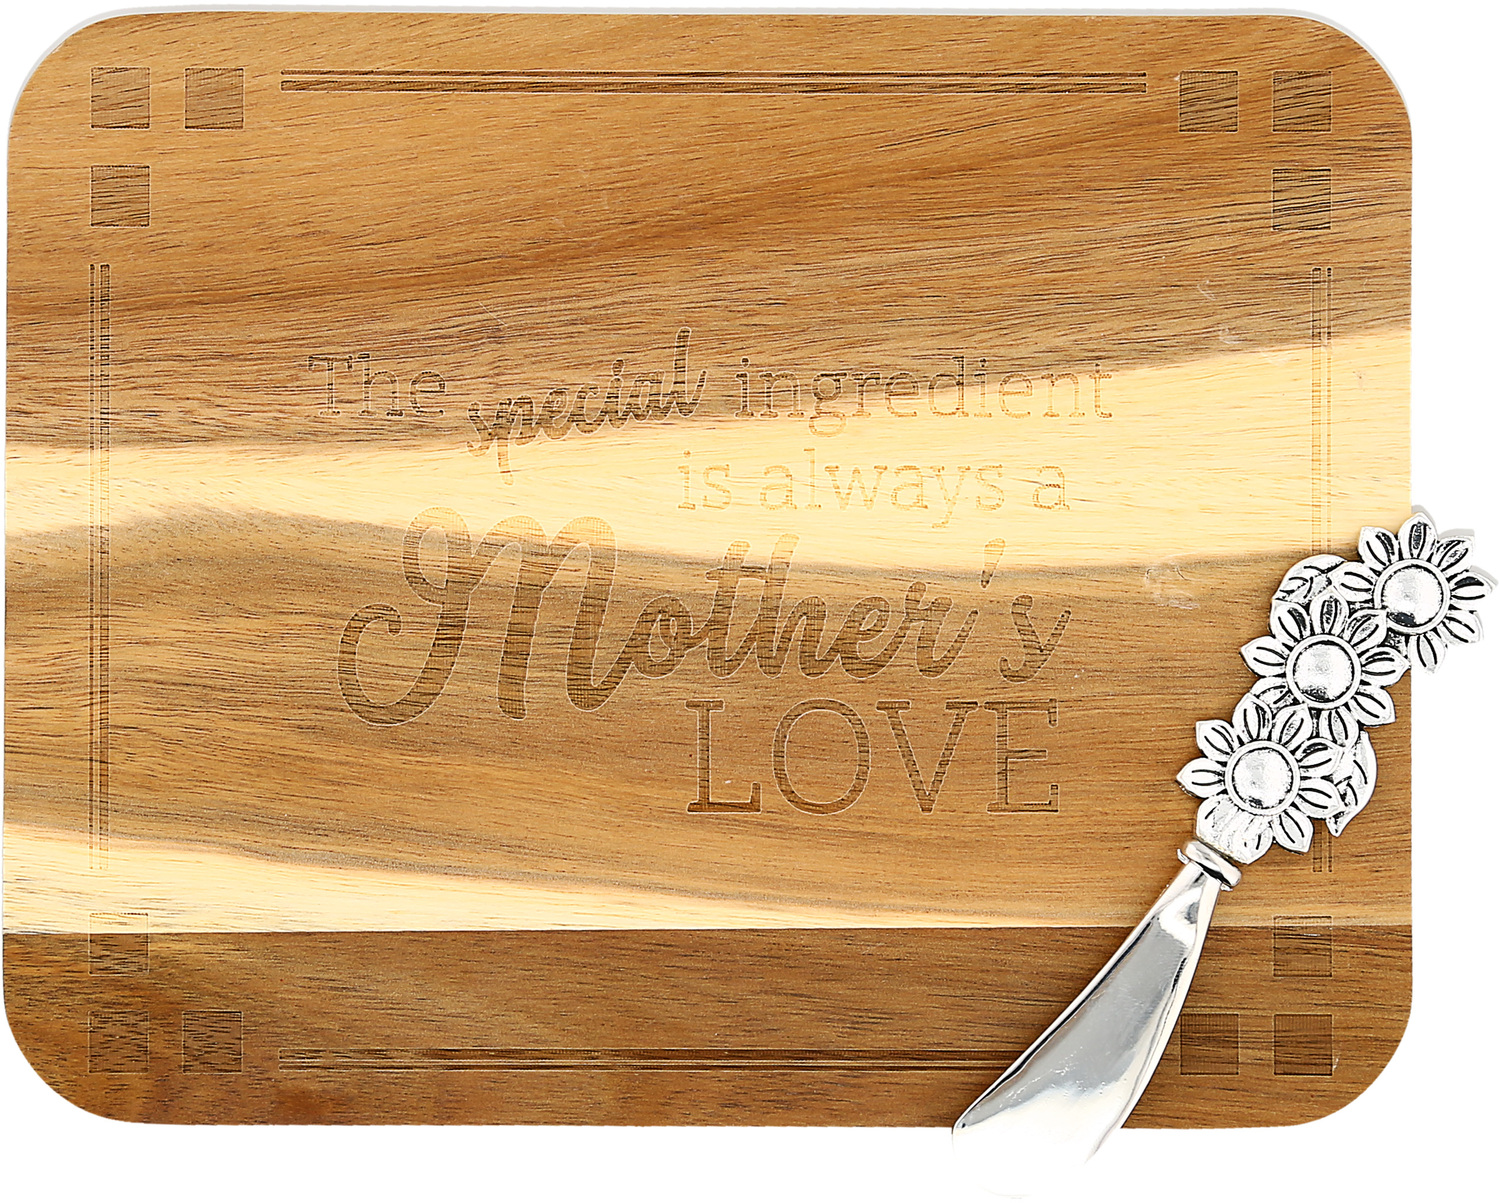 Mother's Love by Farmhouse Family - Mother's Love - 9" x 7" Acacia Serving Board with Spreader